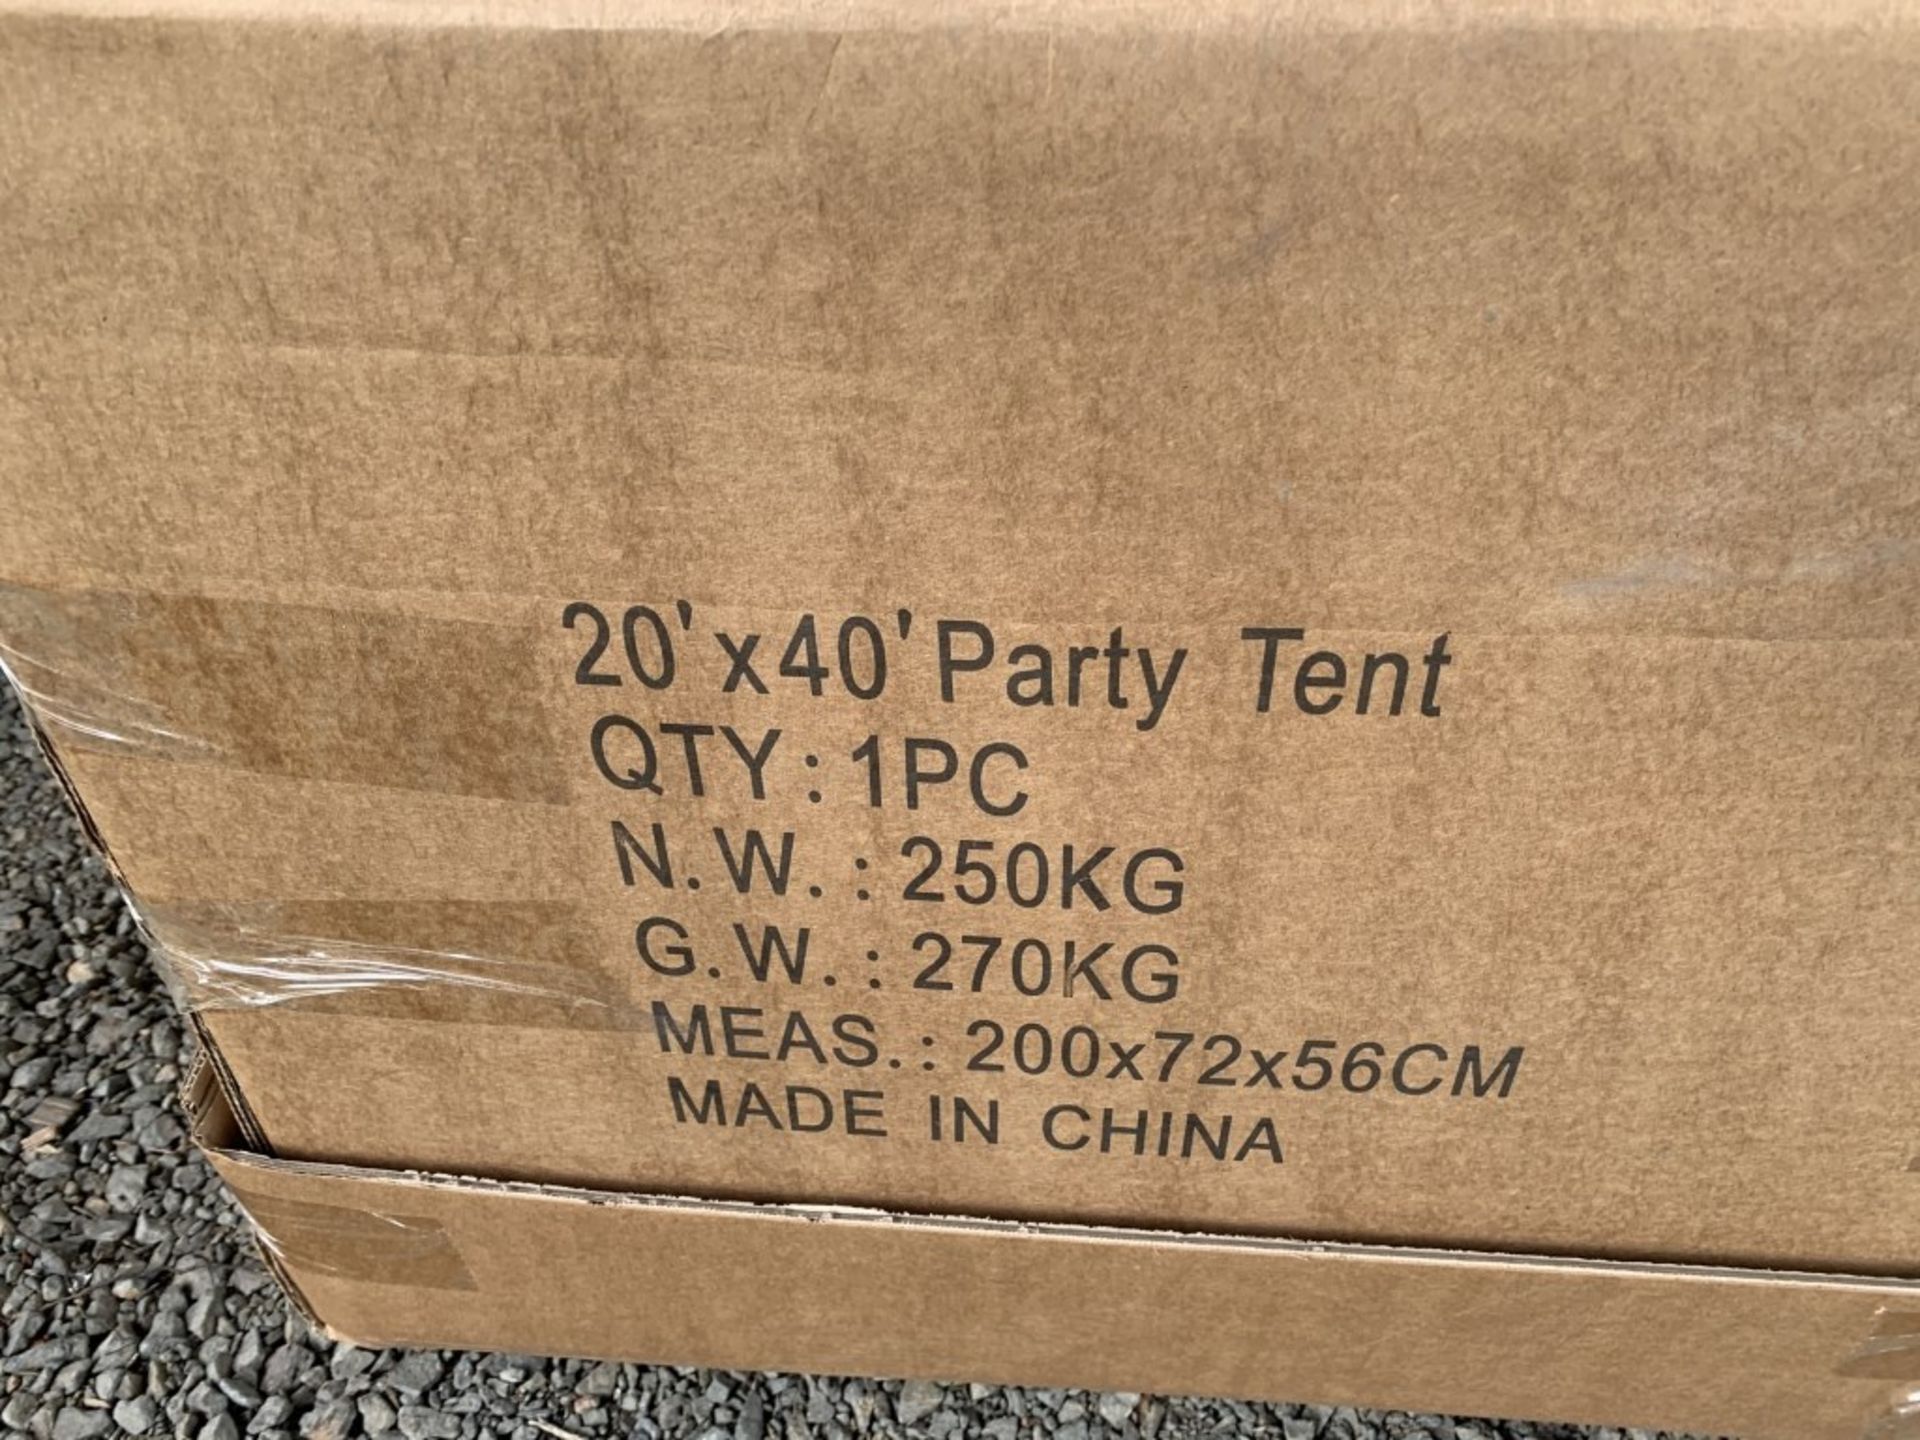 2019 Golden Mount Party Tent - Image 3 of 3